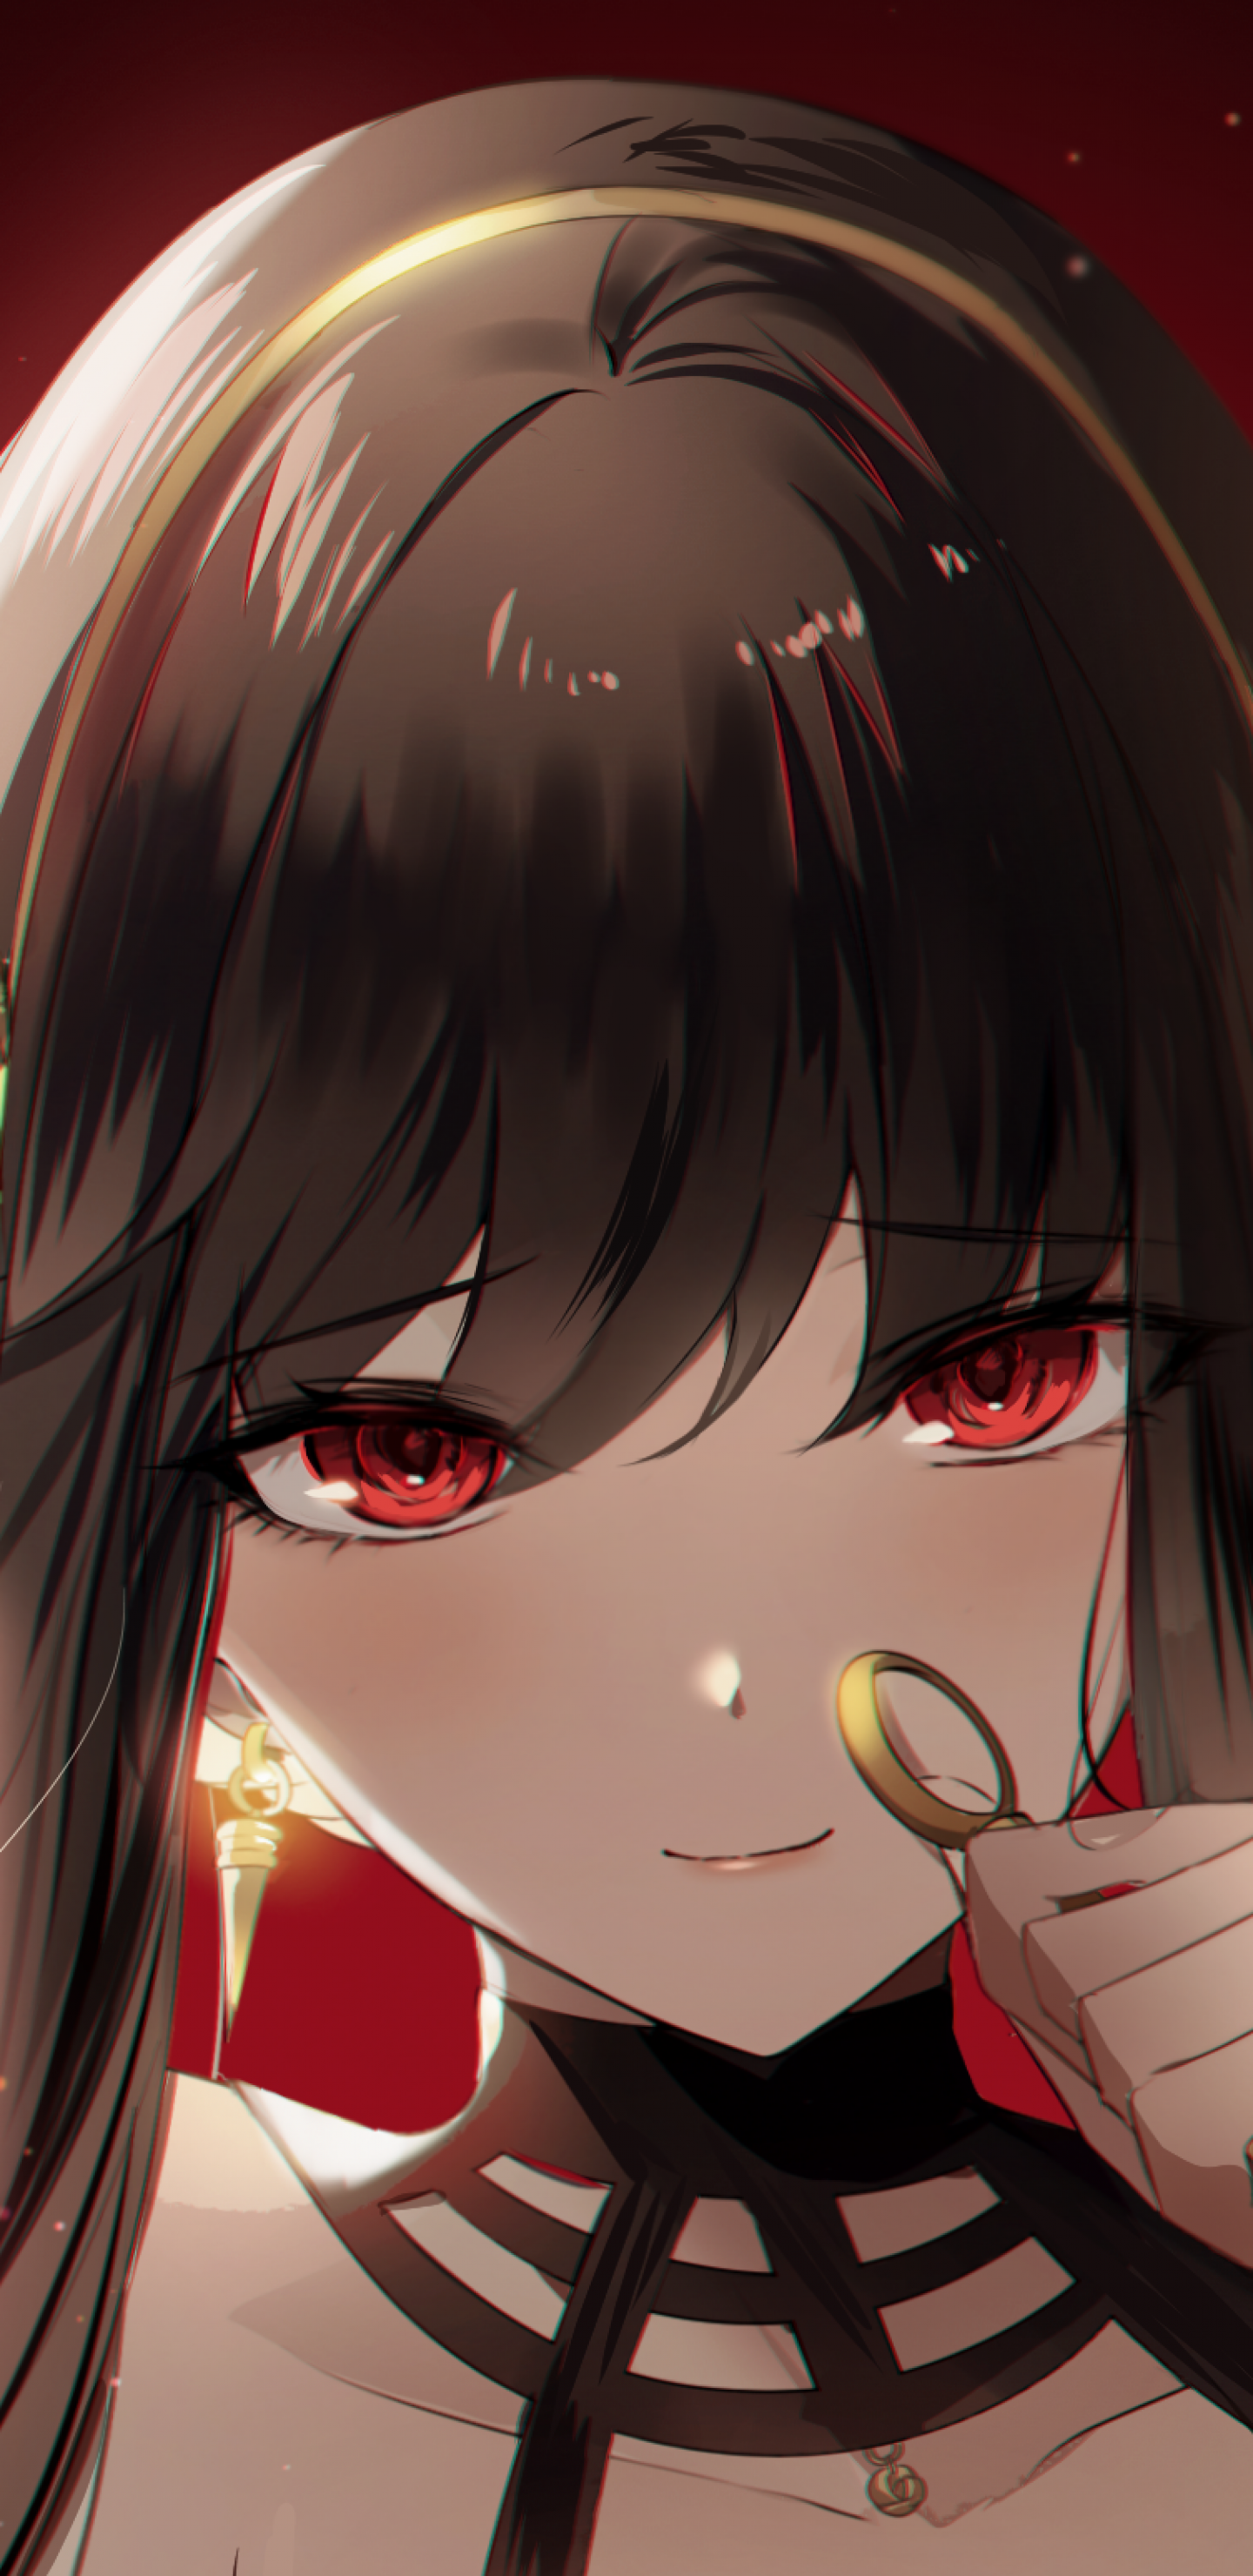 Download 1440x2960 Yor Briar, Beautiful Anime Girl, Spy X Family, Red Eyes Wallpaper for Samsung Galaxy S Note S S8+, Google Pixel 3 XL